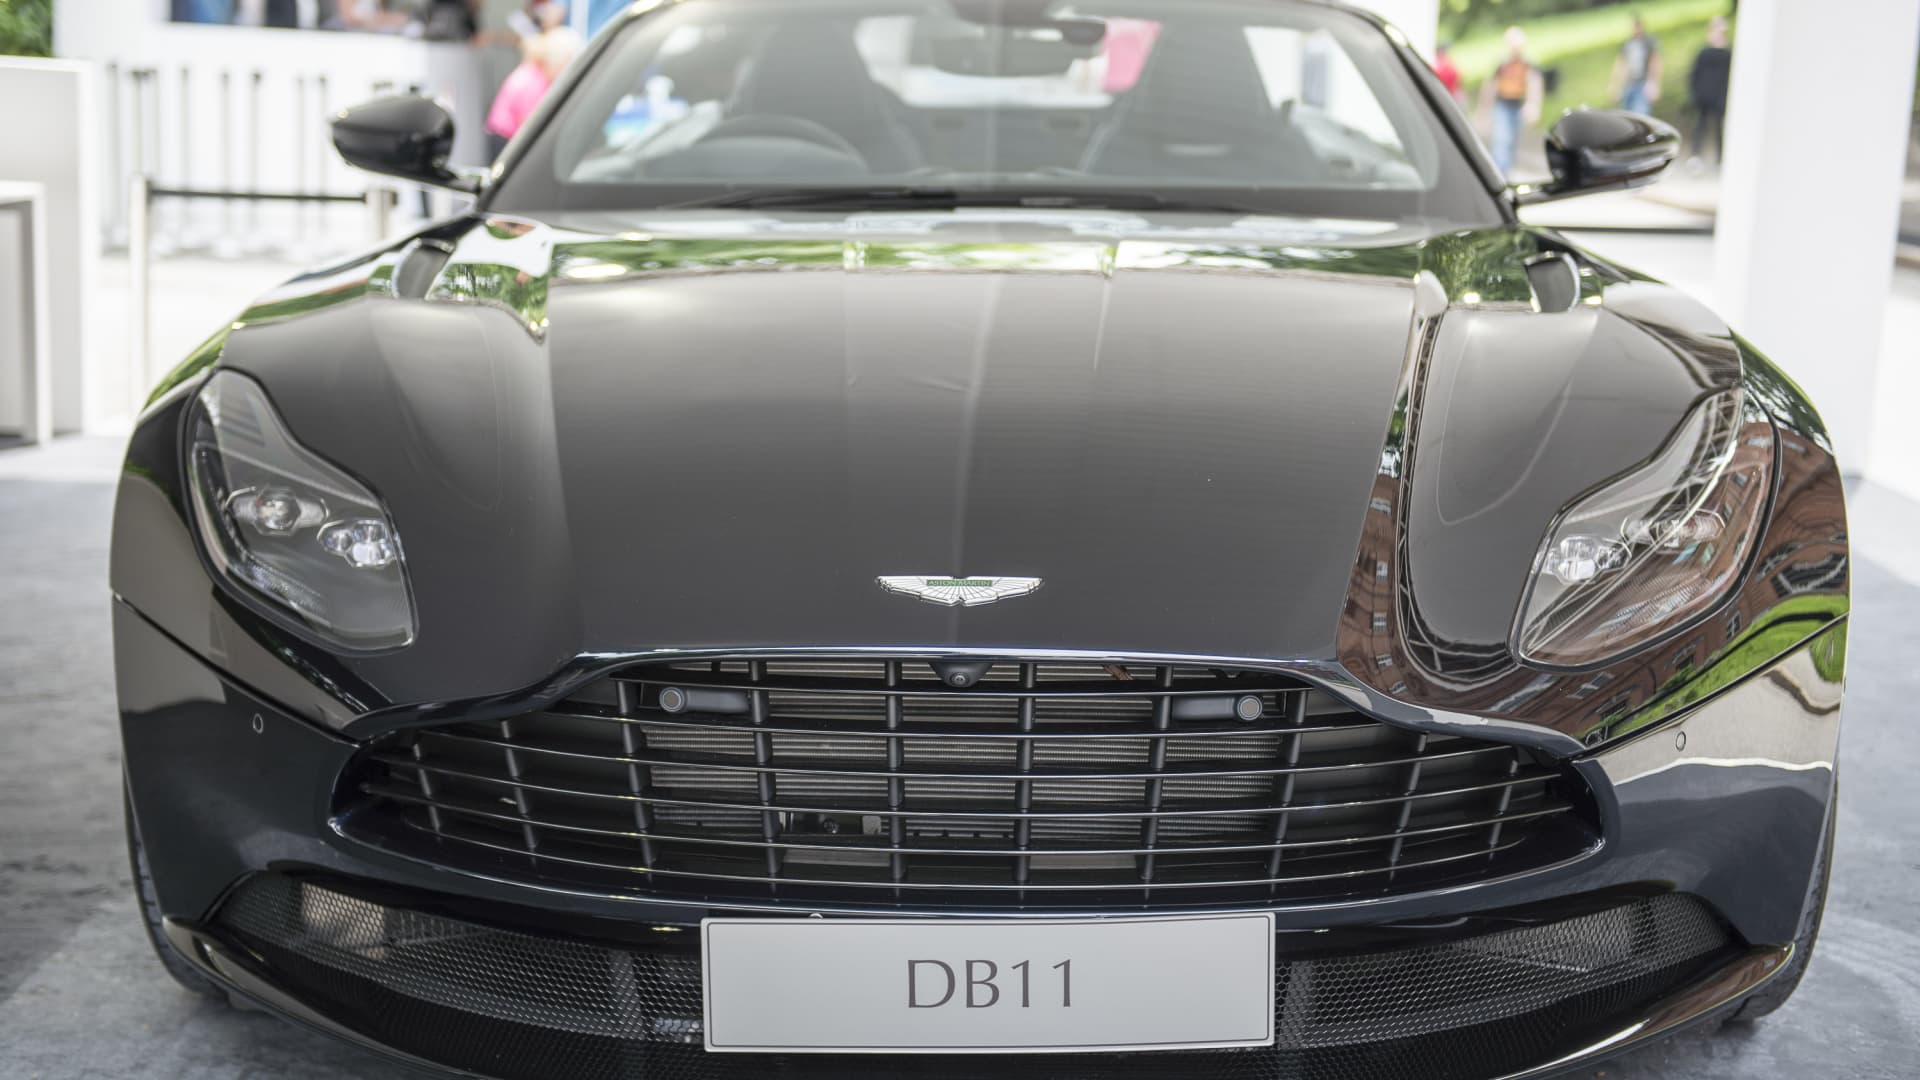 Aston Martin’s losses nearly doubled on lower sales, but carmaker projects growth from new models